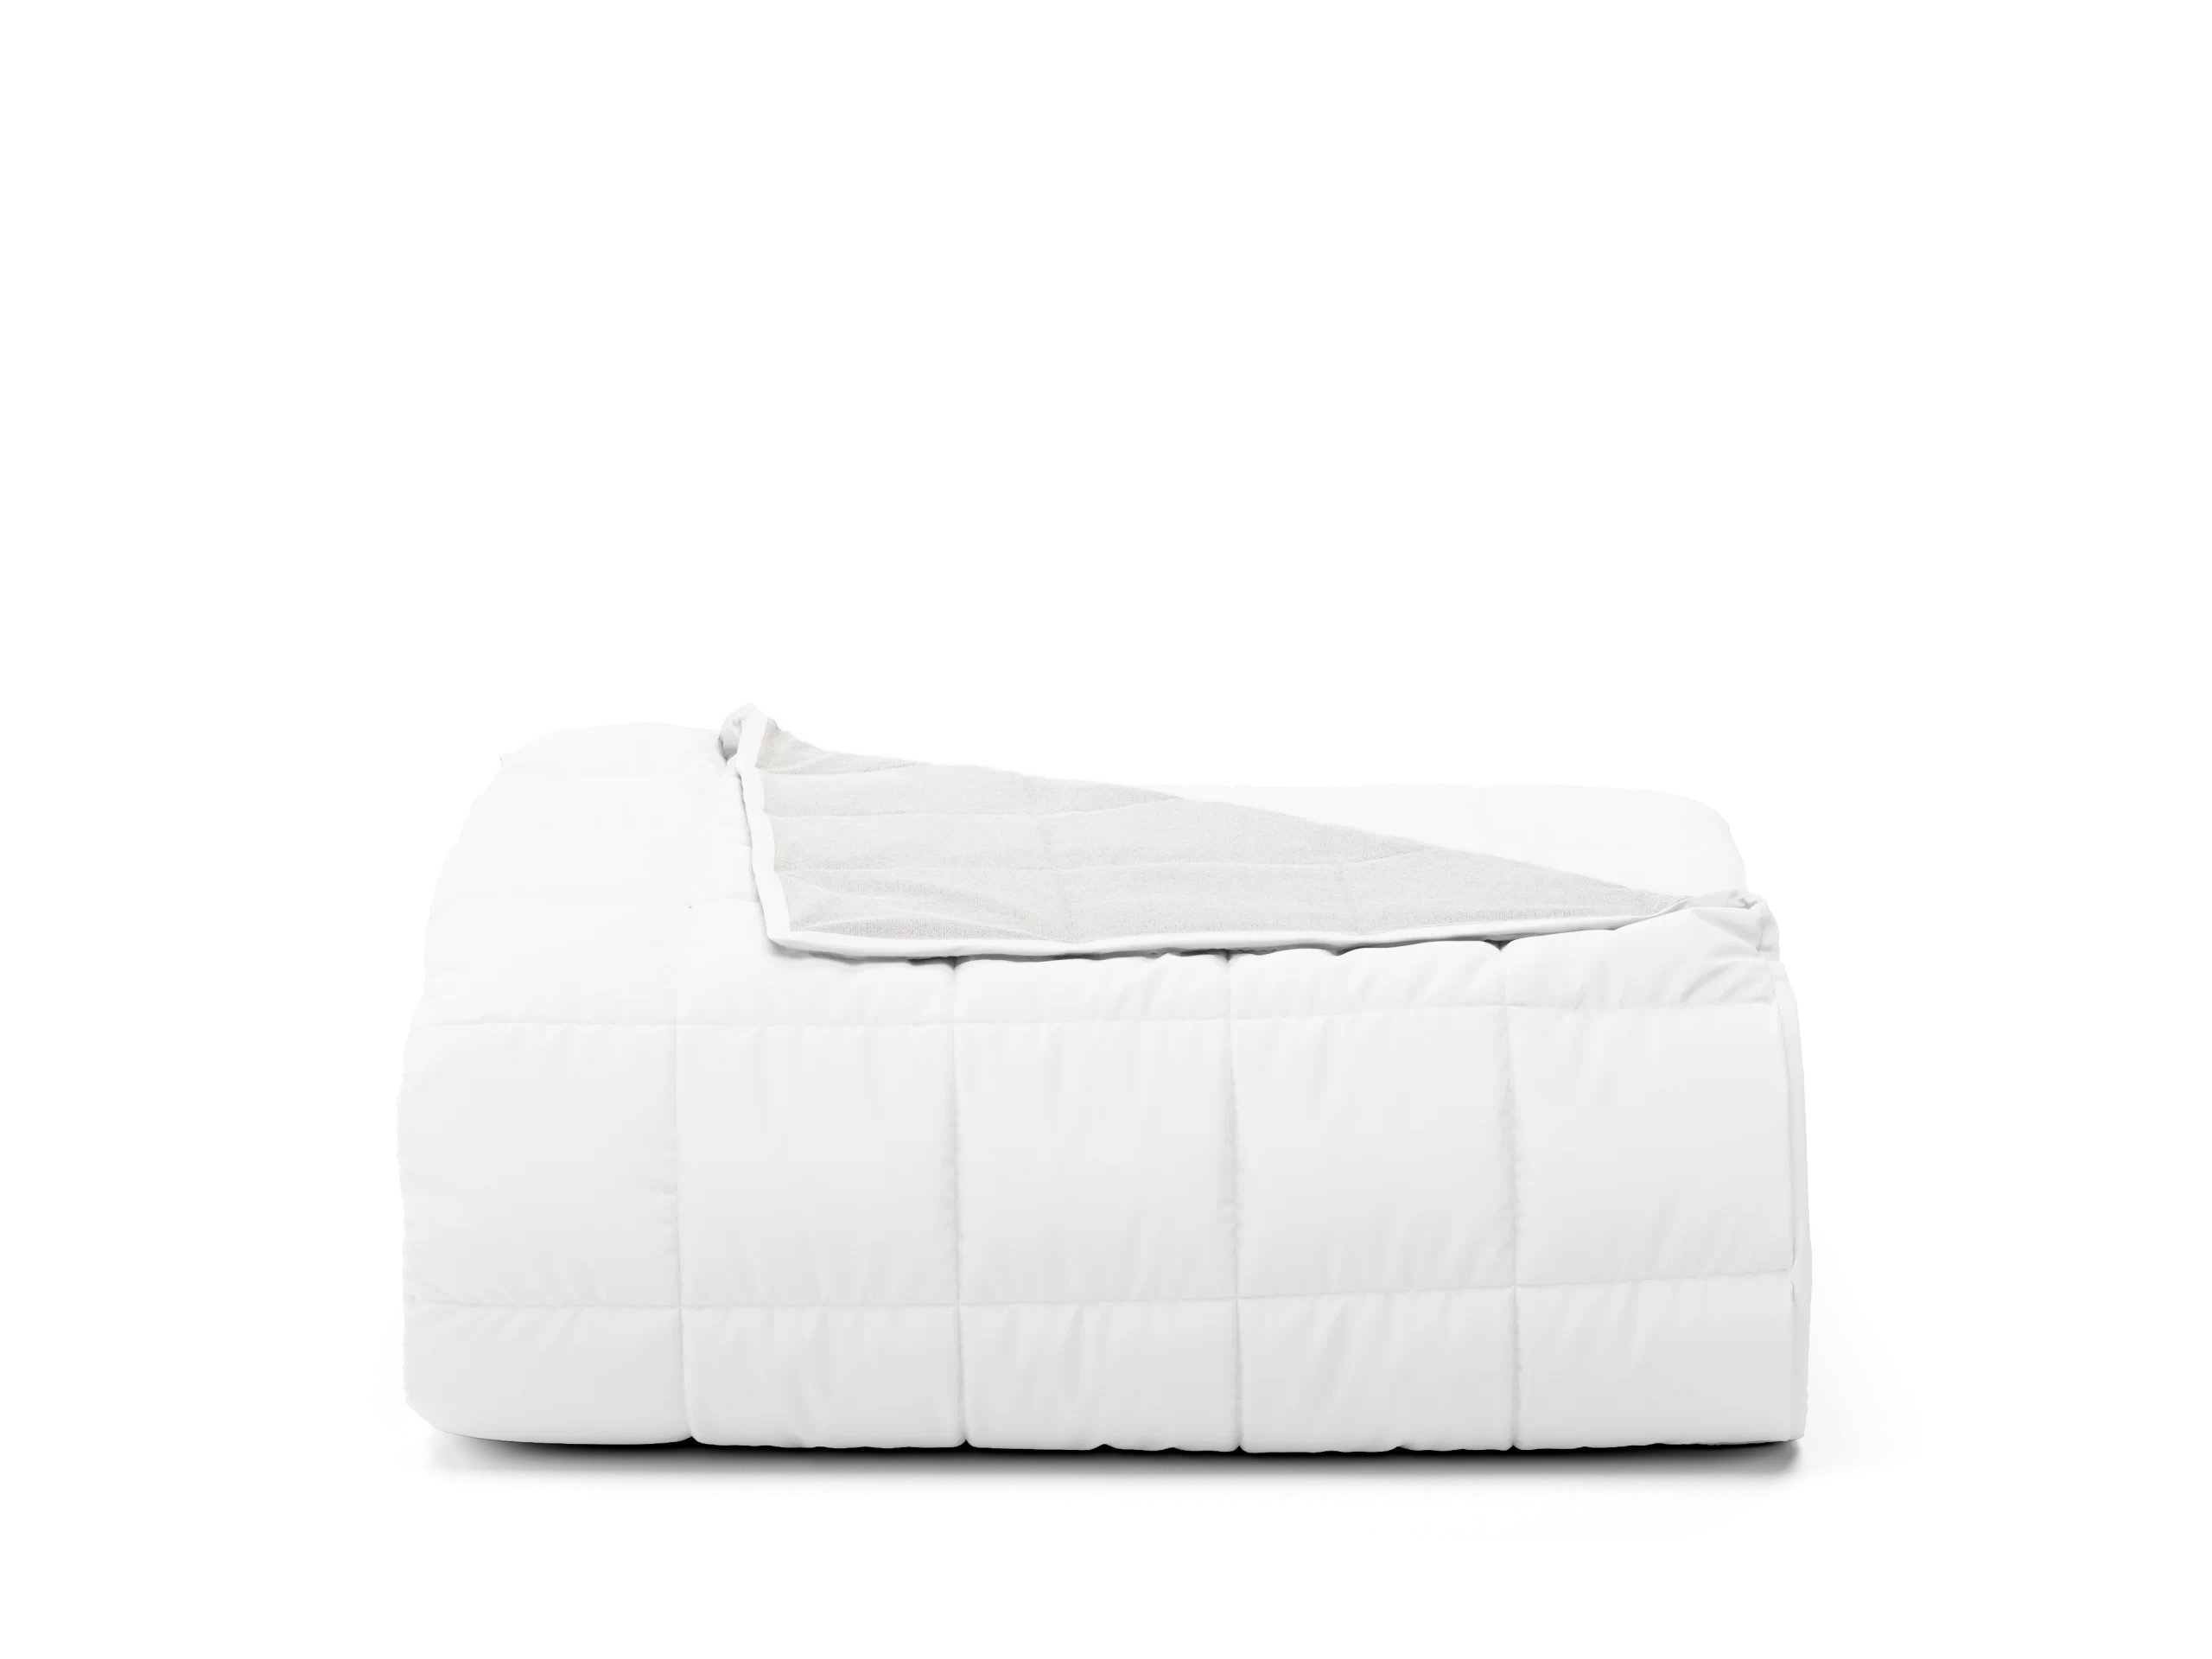 Nolah Bamboo Weighted Blanket